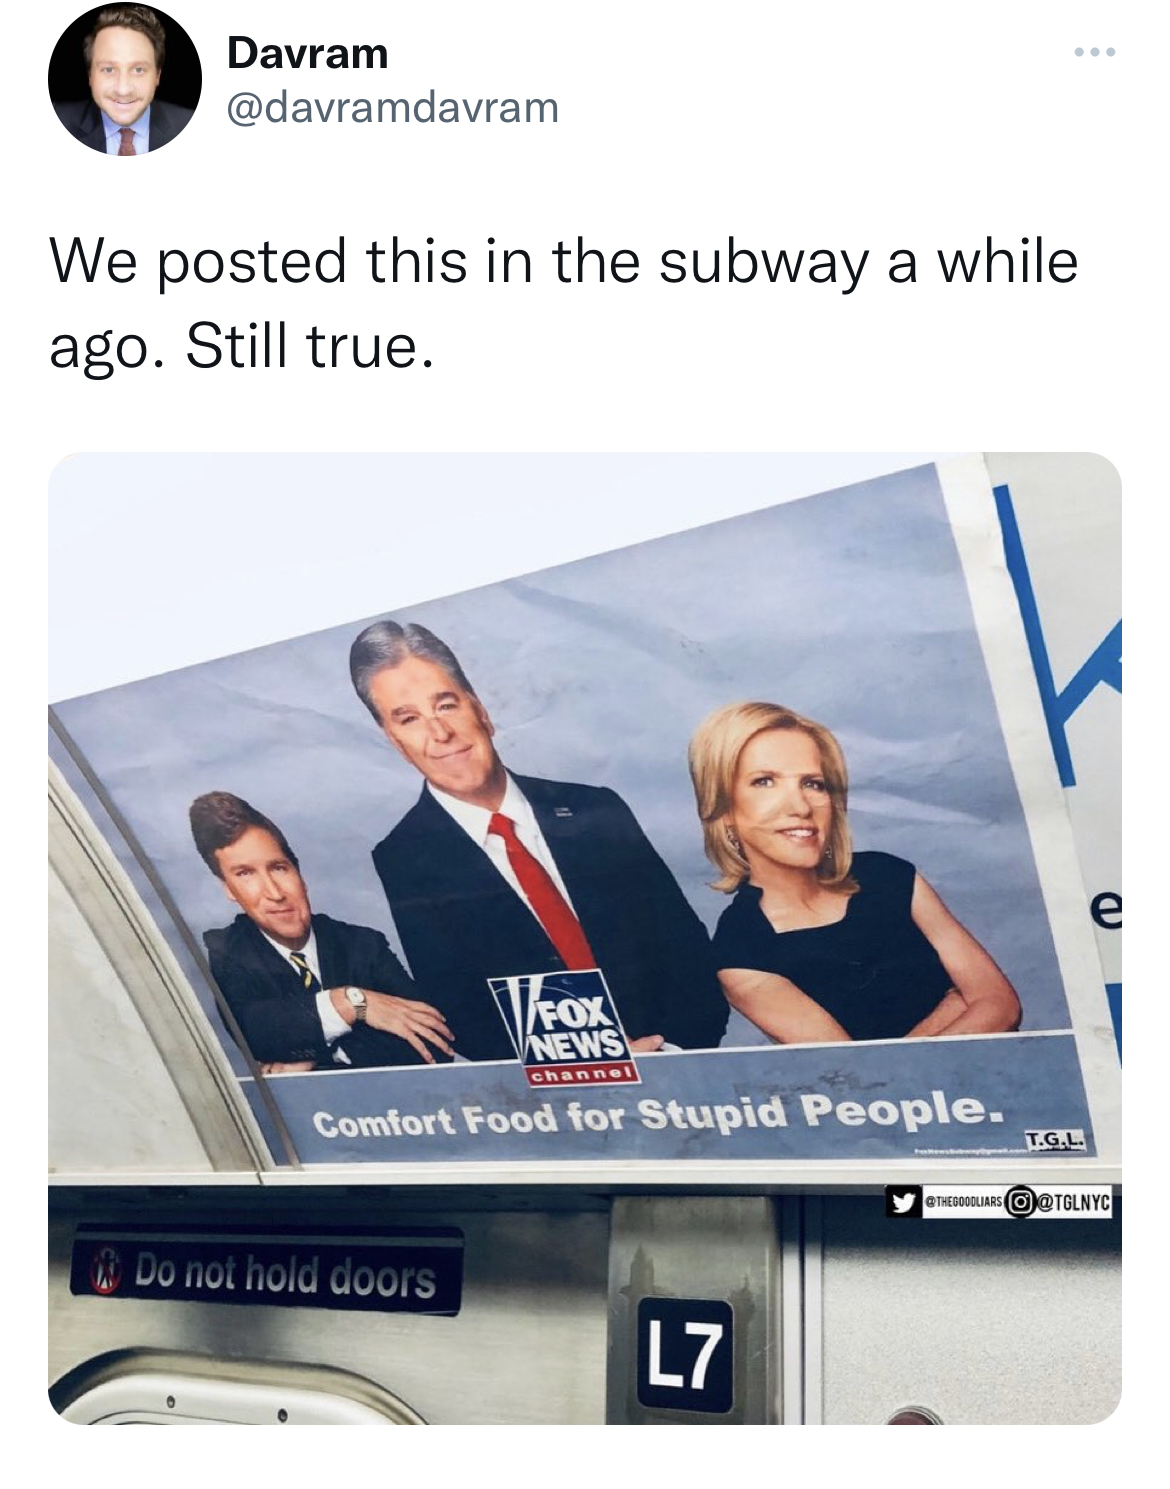 Tweets dunking on celebs - display advertising - Davram We posted this in the subway a while ago. Still true. Fox News channel Comfort Food for Stupid People. Do not hold doors L7 Lol e Tolnyc